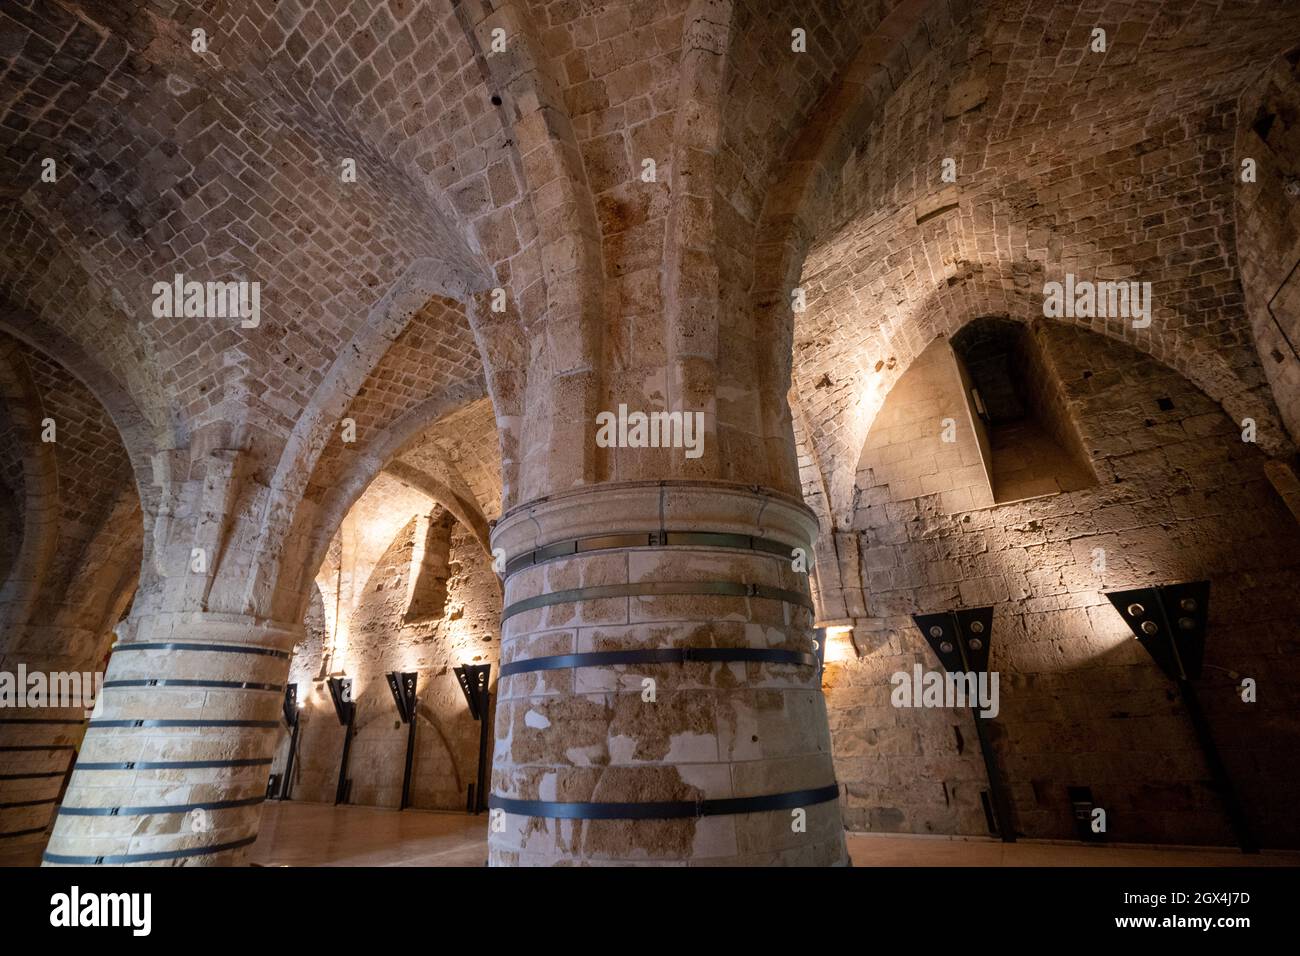 Crusaders' castle, Templar's castle in the historic district, Acre or Akko, UNESCO World Heritage Site, Israel, Middle East Stock Photo